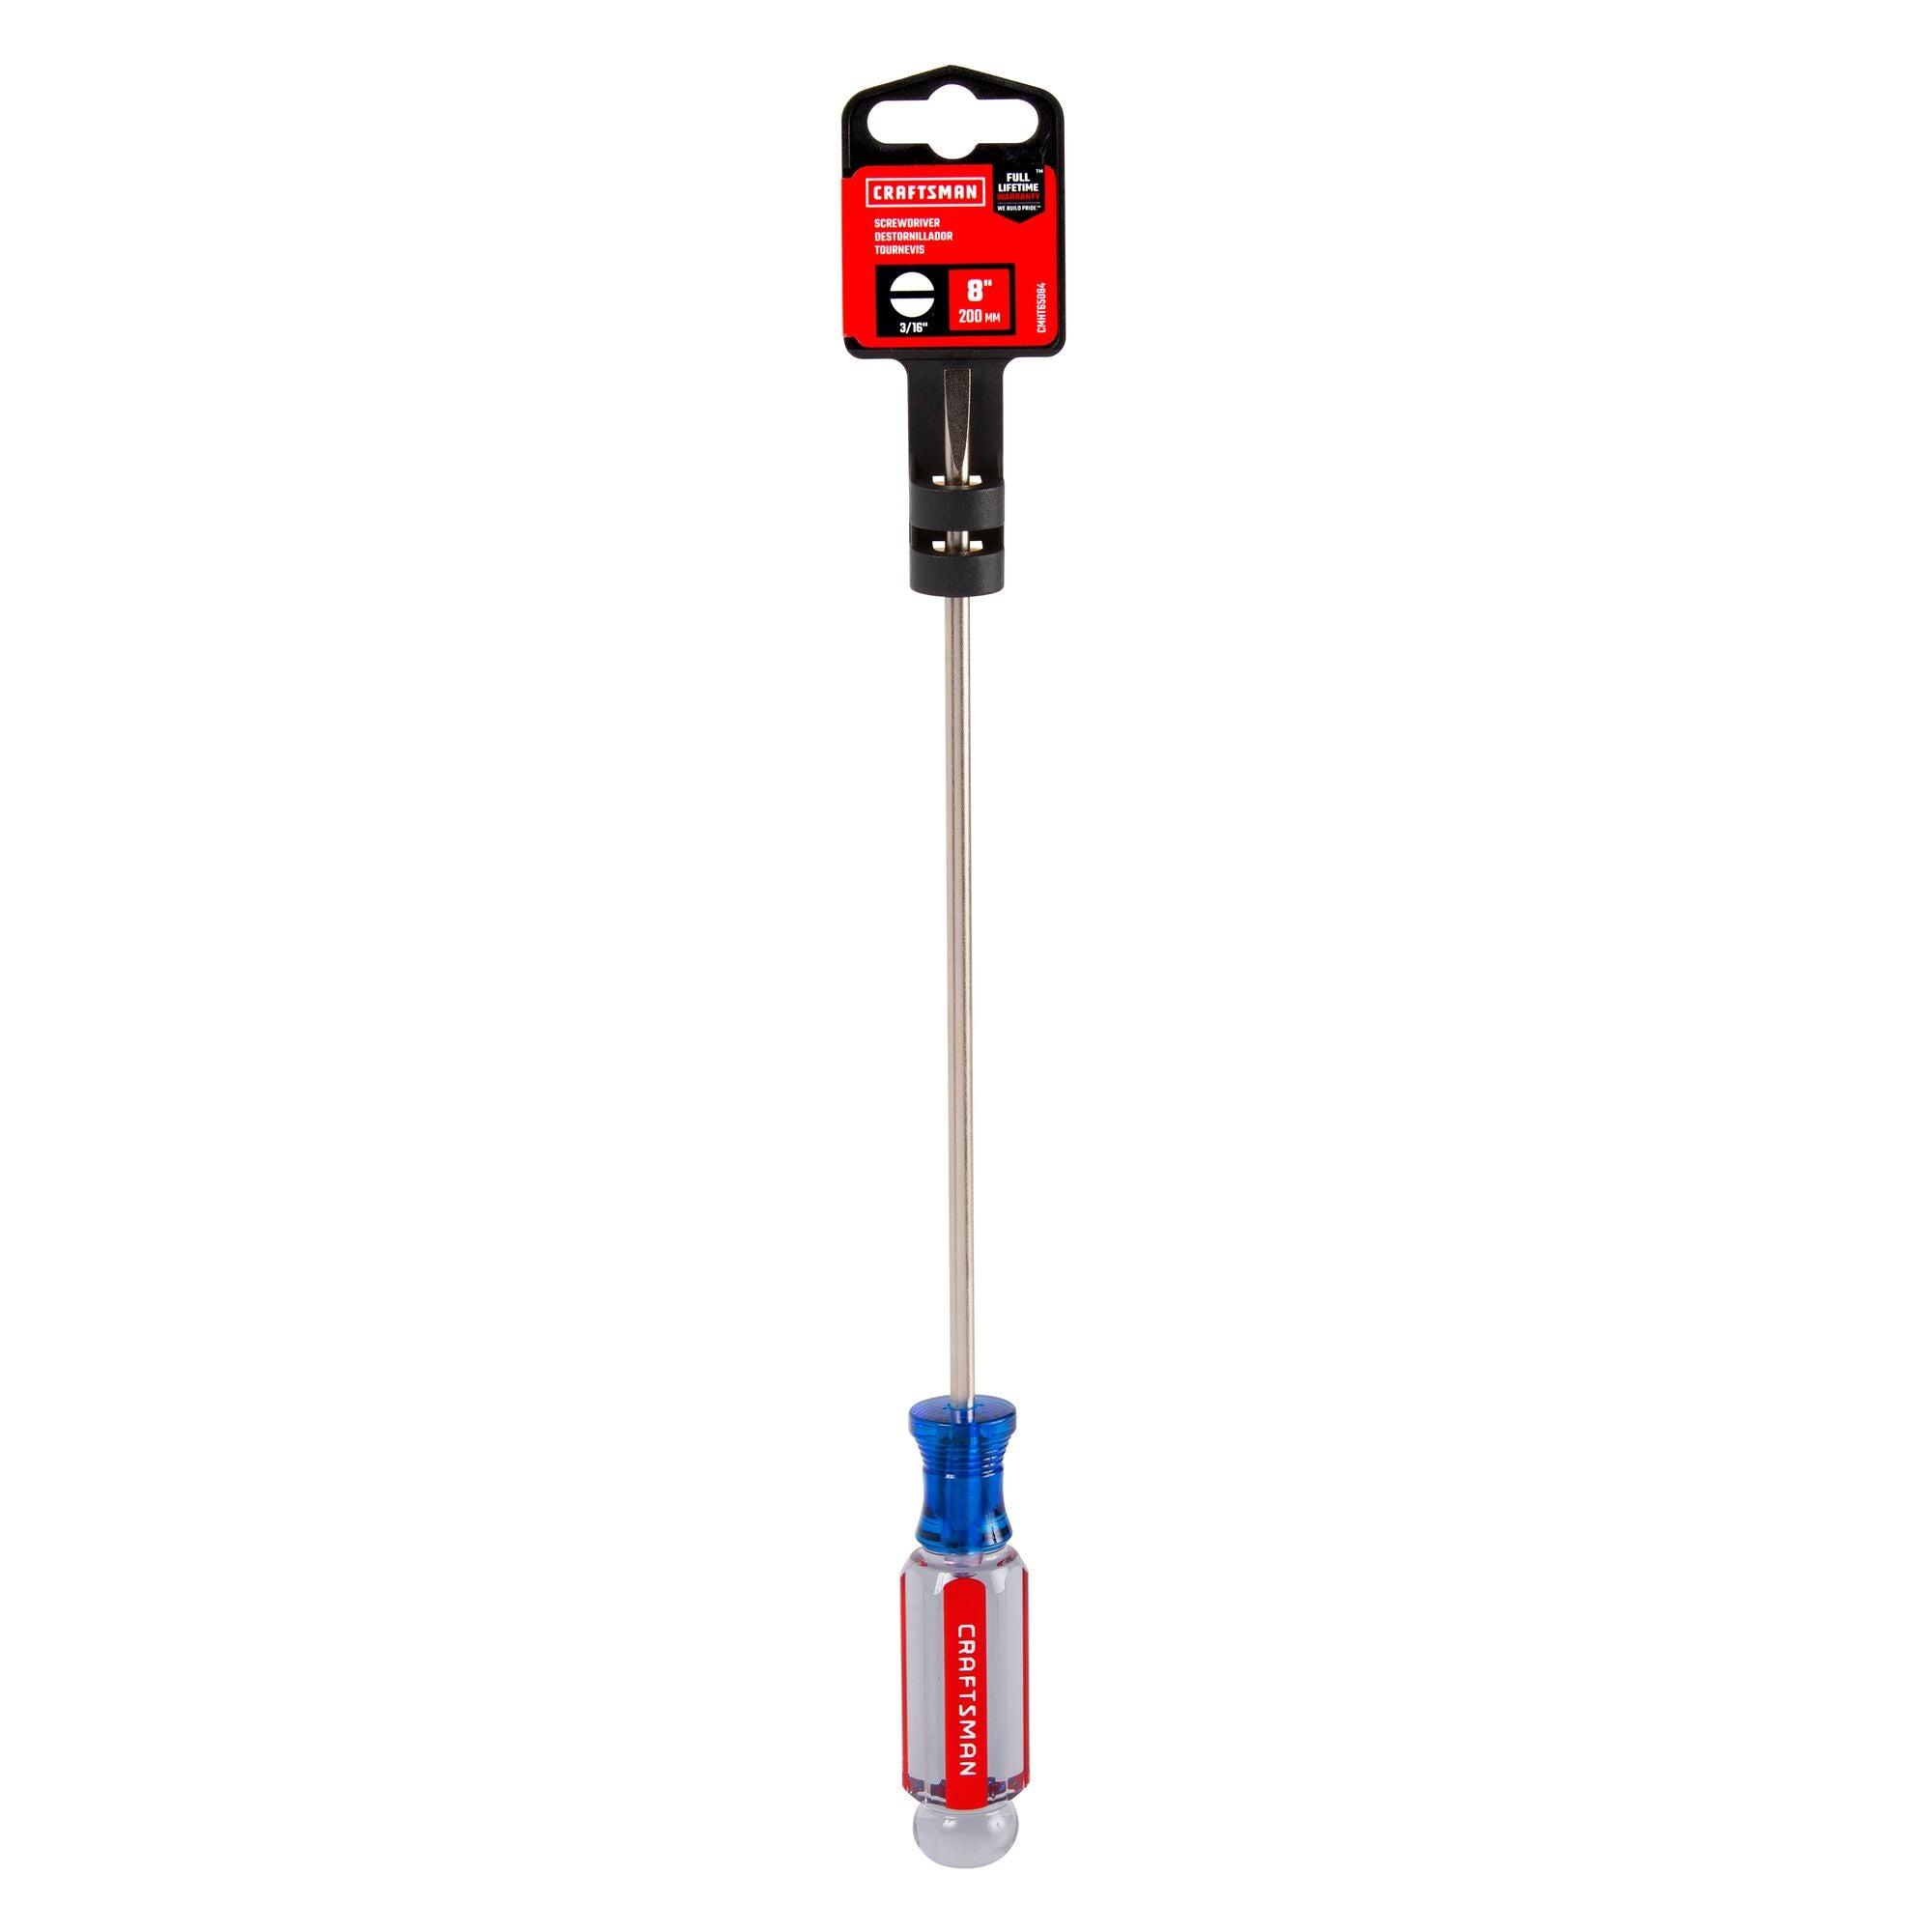 3/16-in x 8-in Slotted Cabinet Acetate Screwdriver | CRAFTSMAN